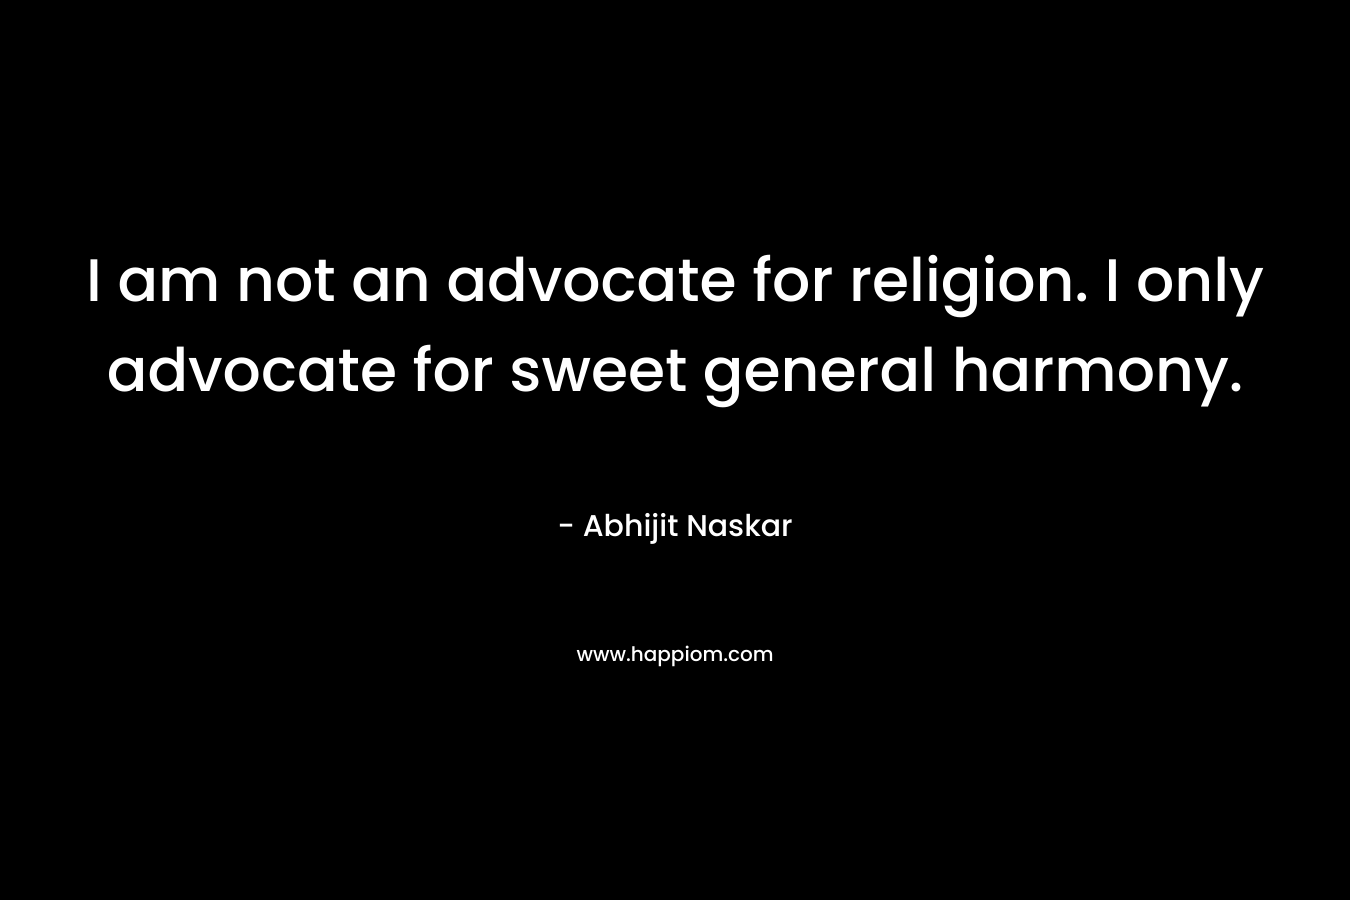 I am not an advocate for religion. I only advocate for sweet general harmony.